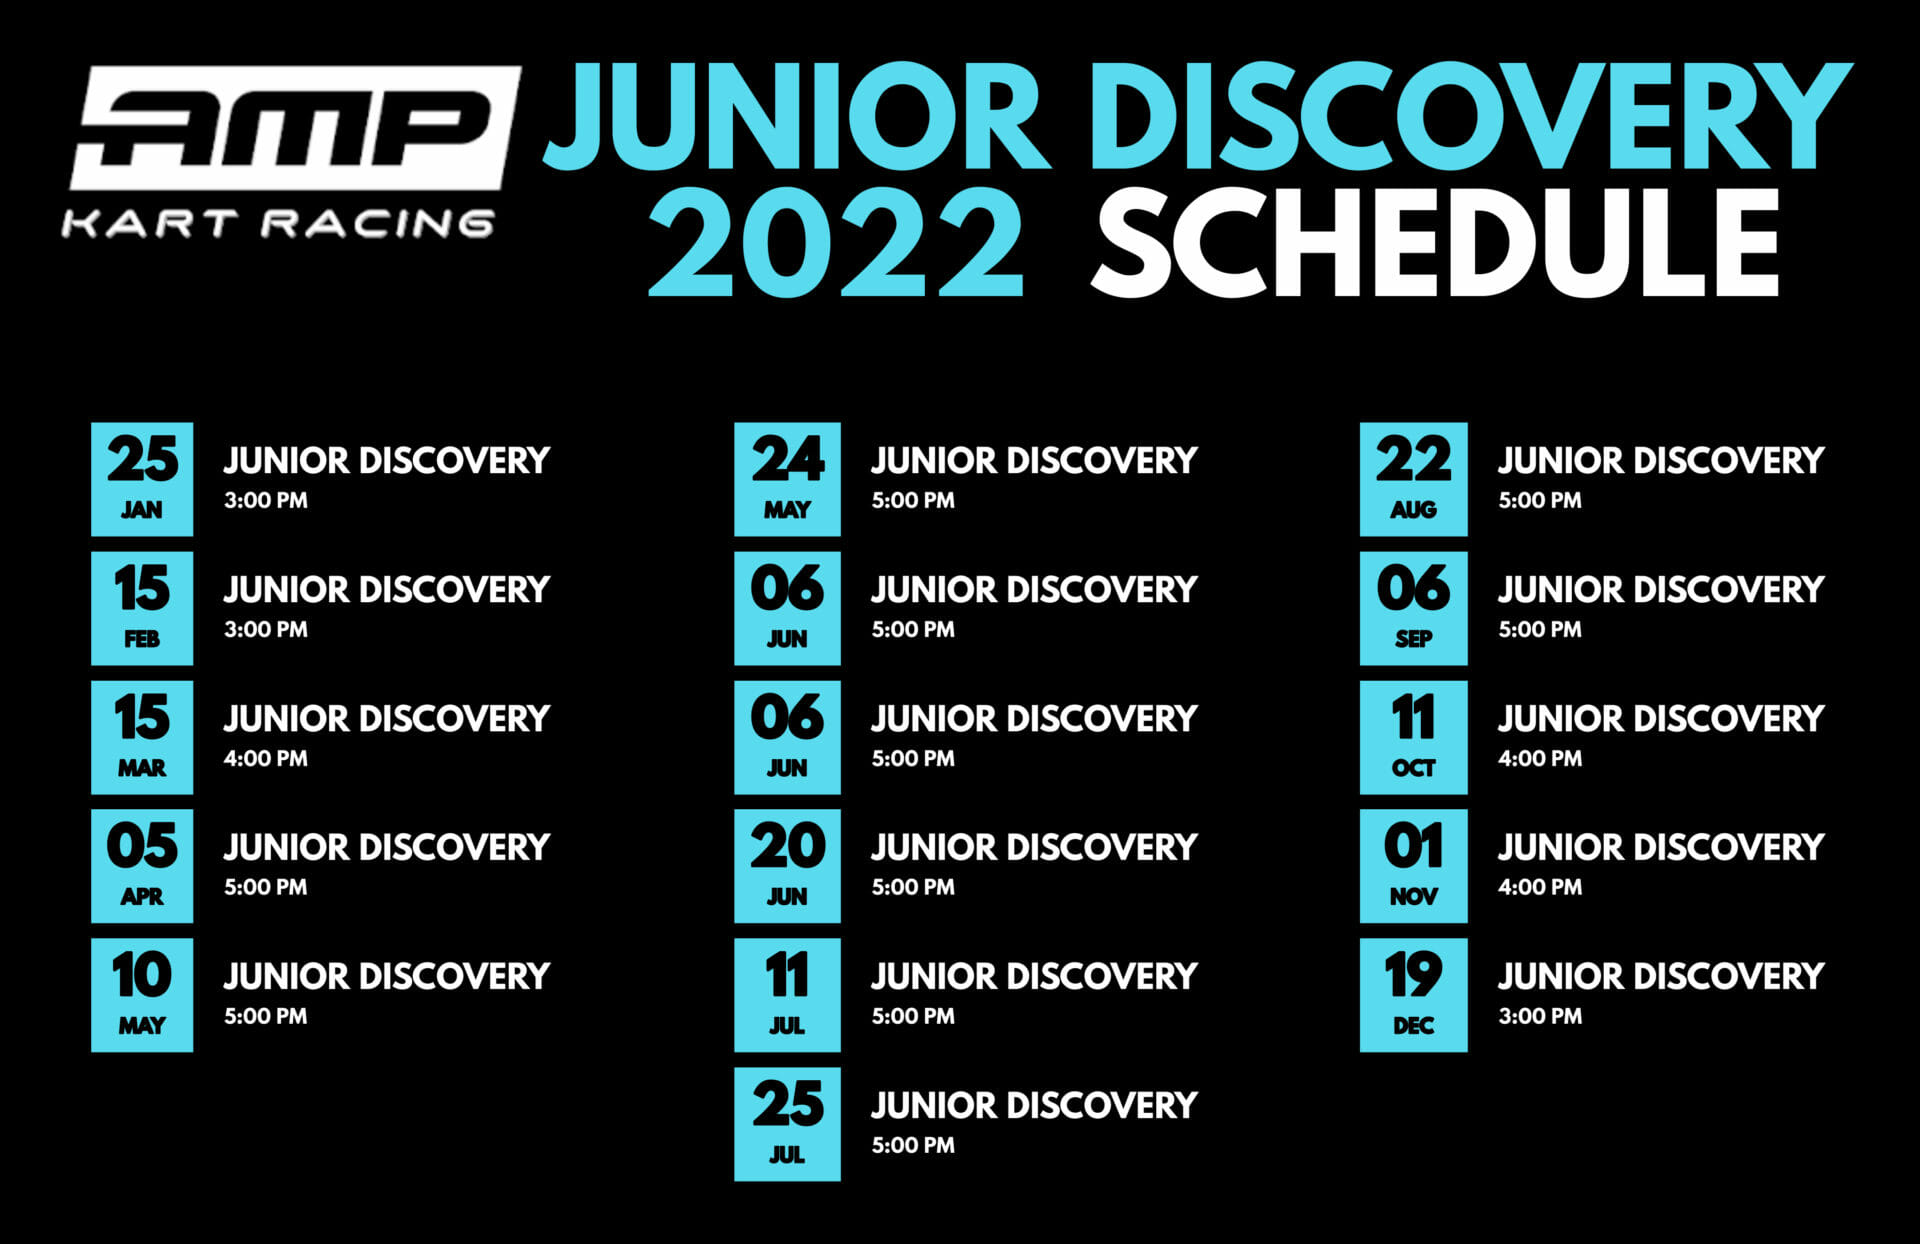 2022 Junior Discovery Schedule - Junior Discovery Experience